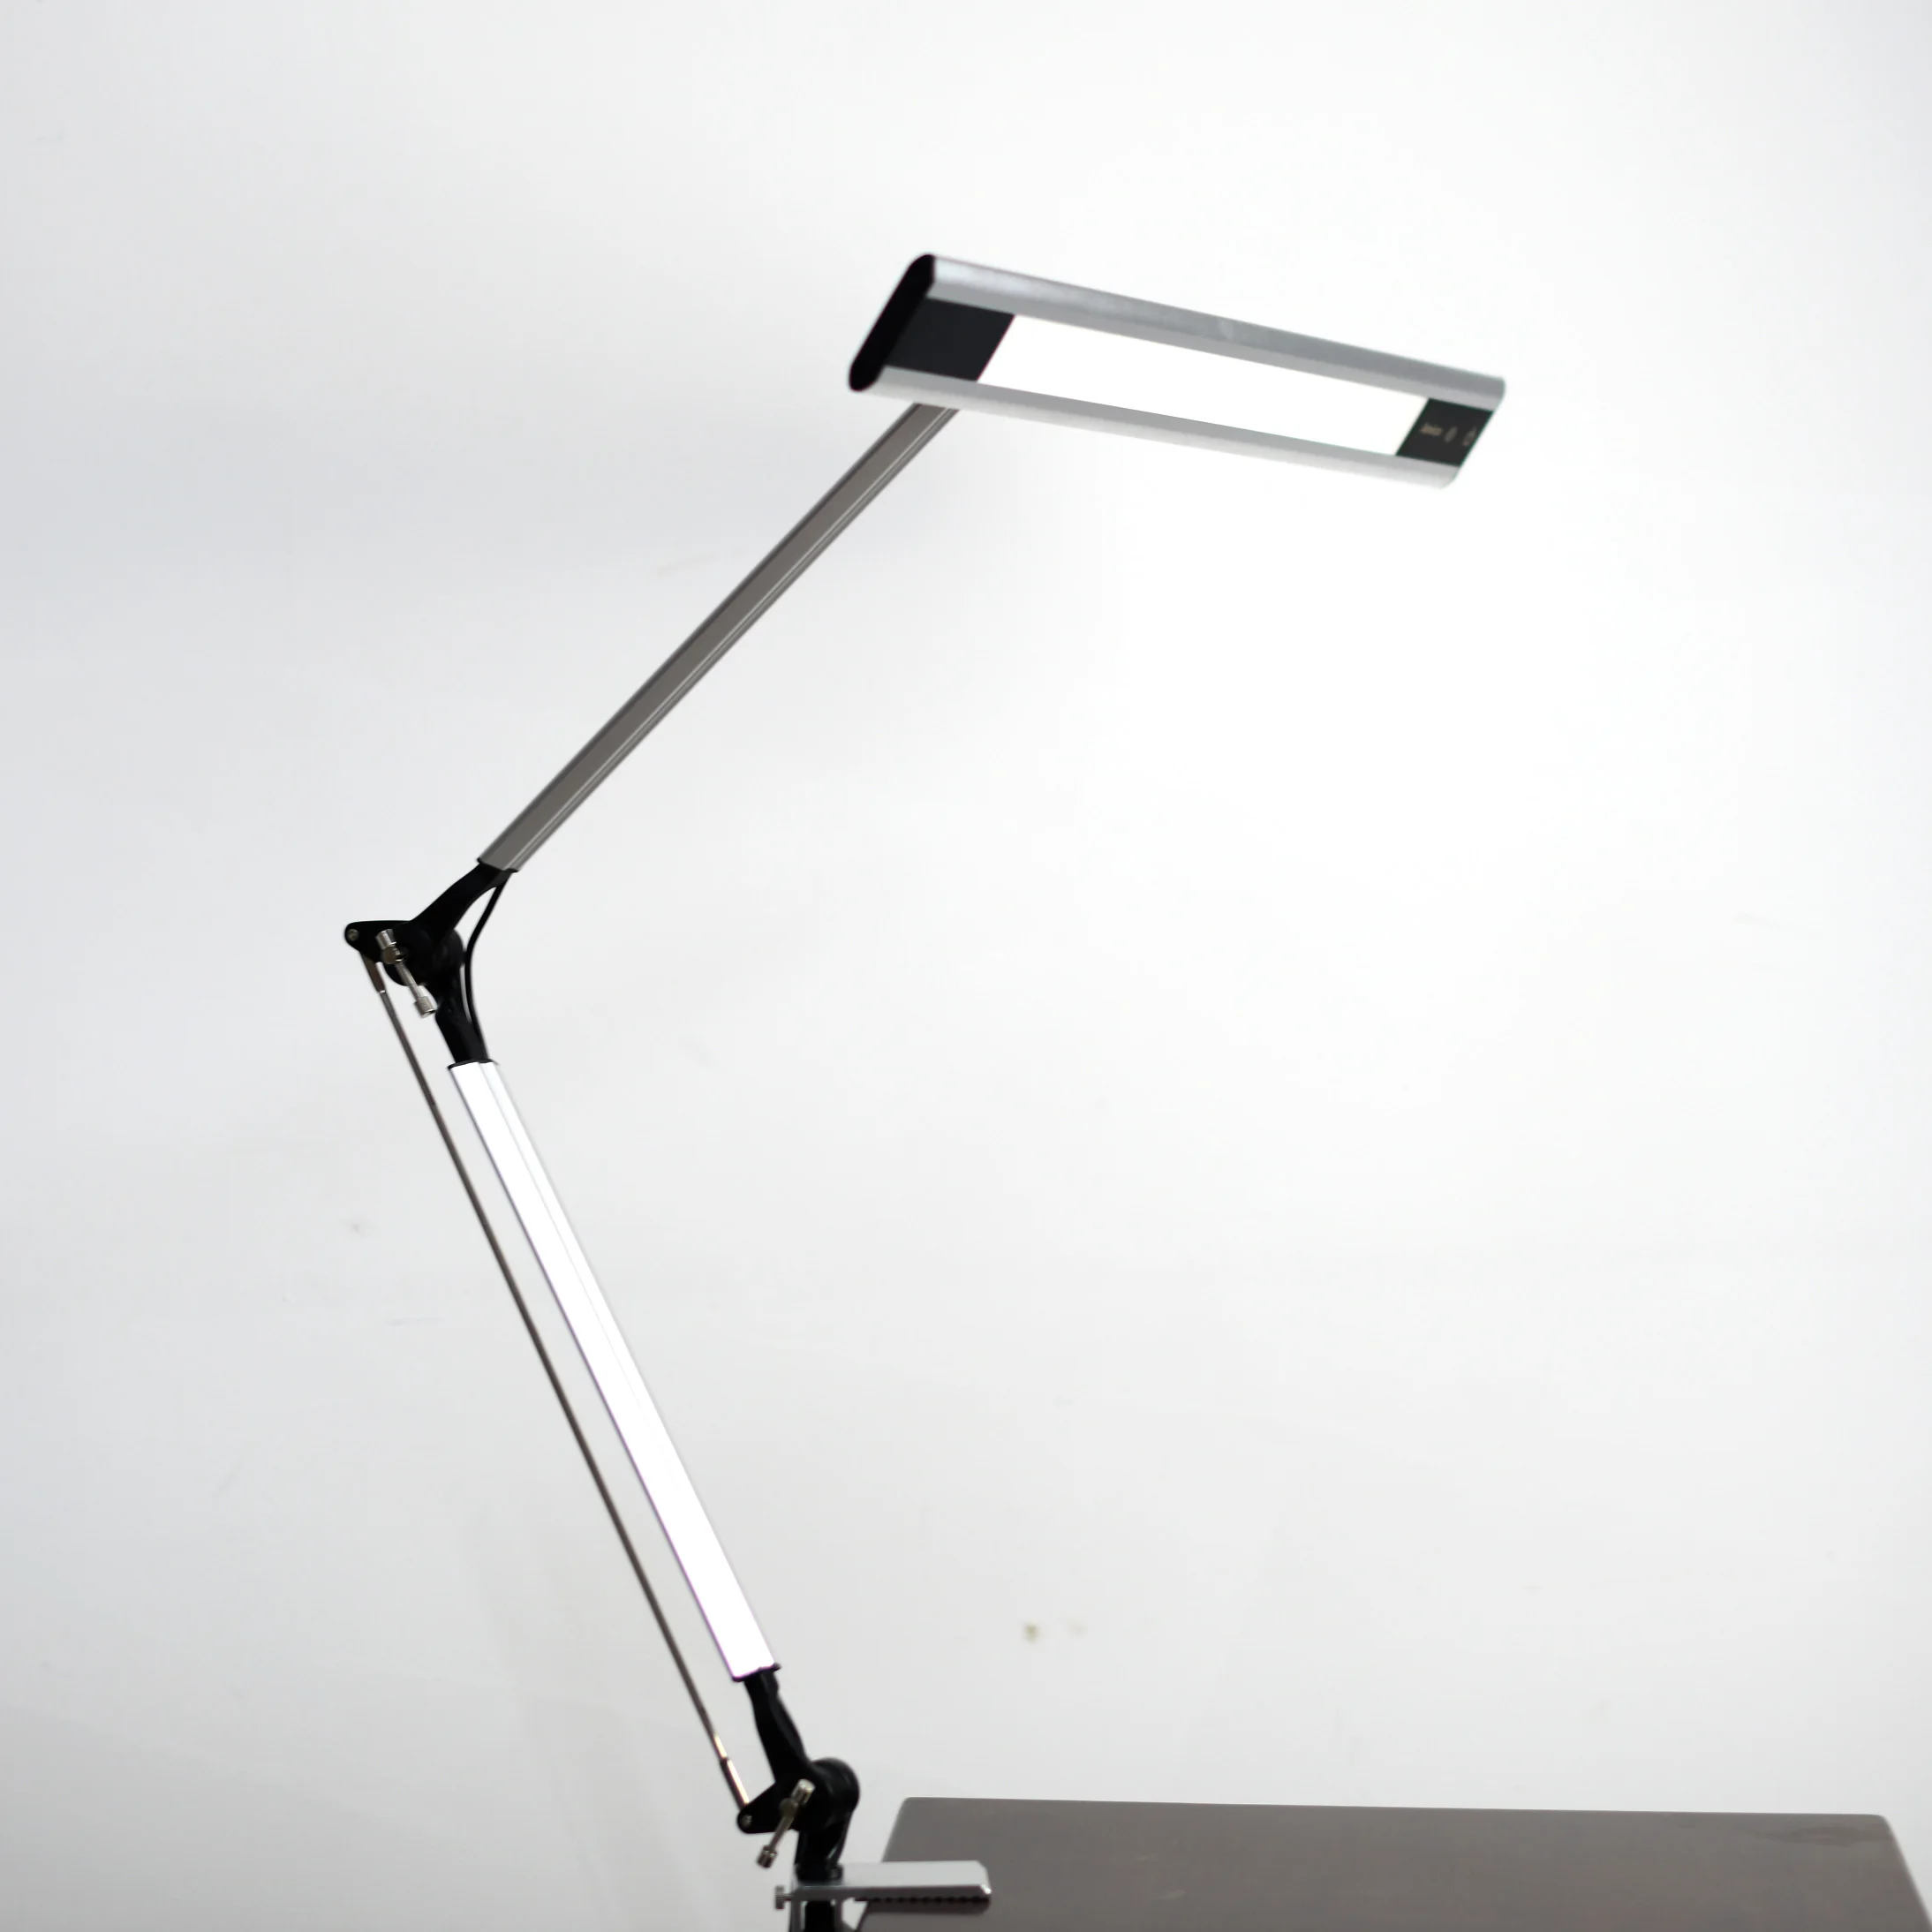 Portable Comfortable Color Adjustable LED Table Desk Lamp for Office Home Laboratory